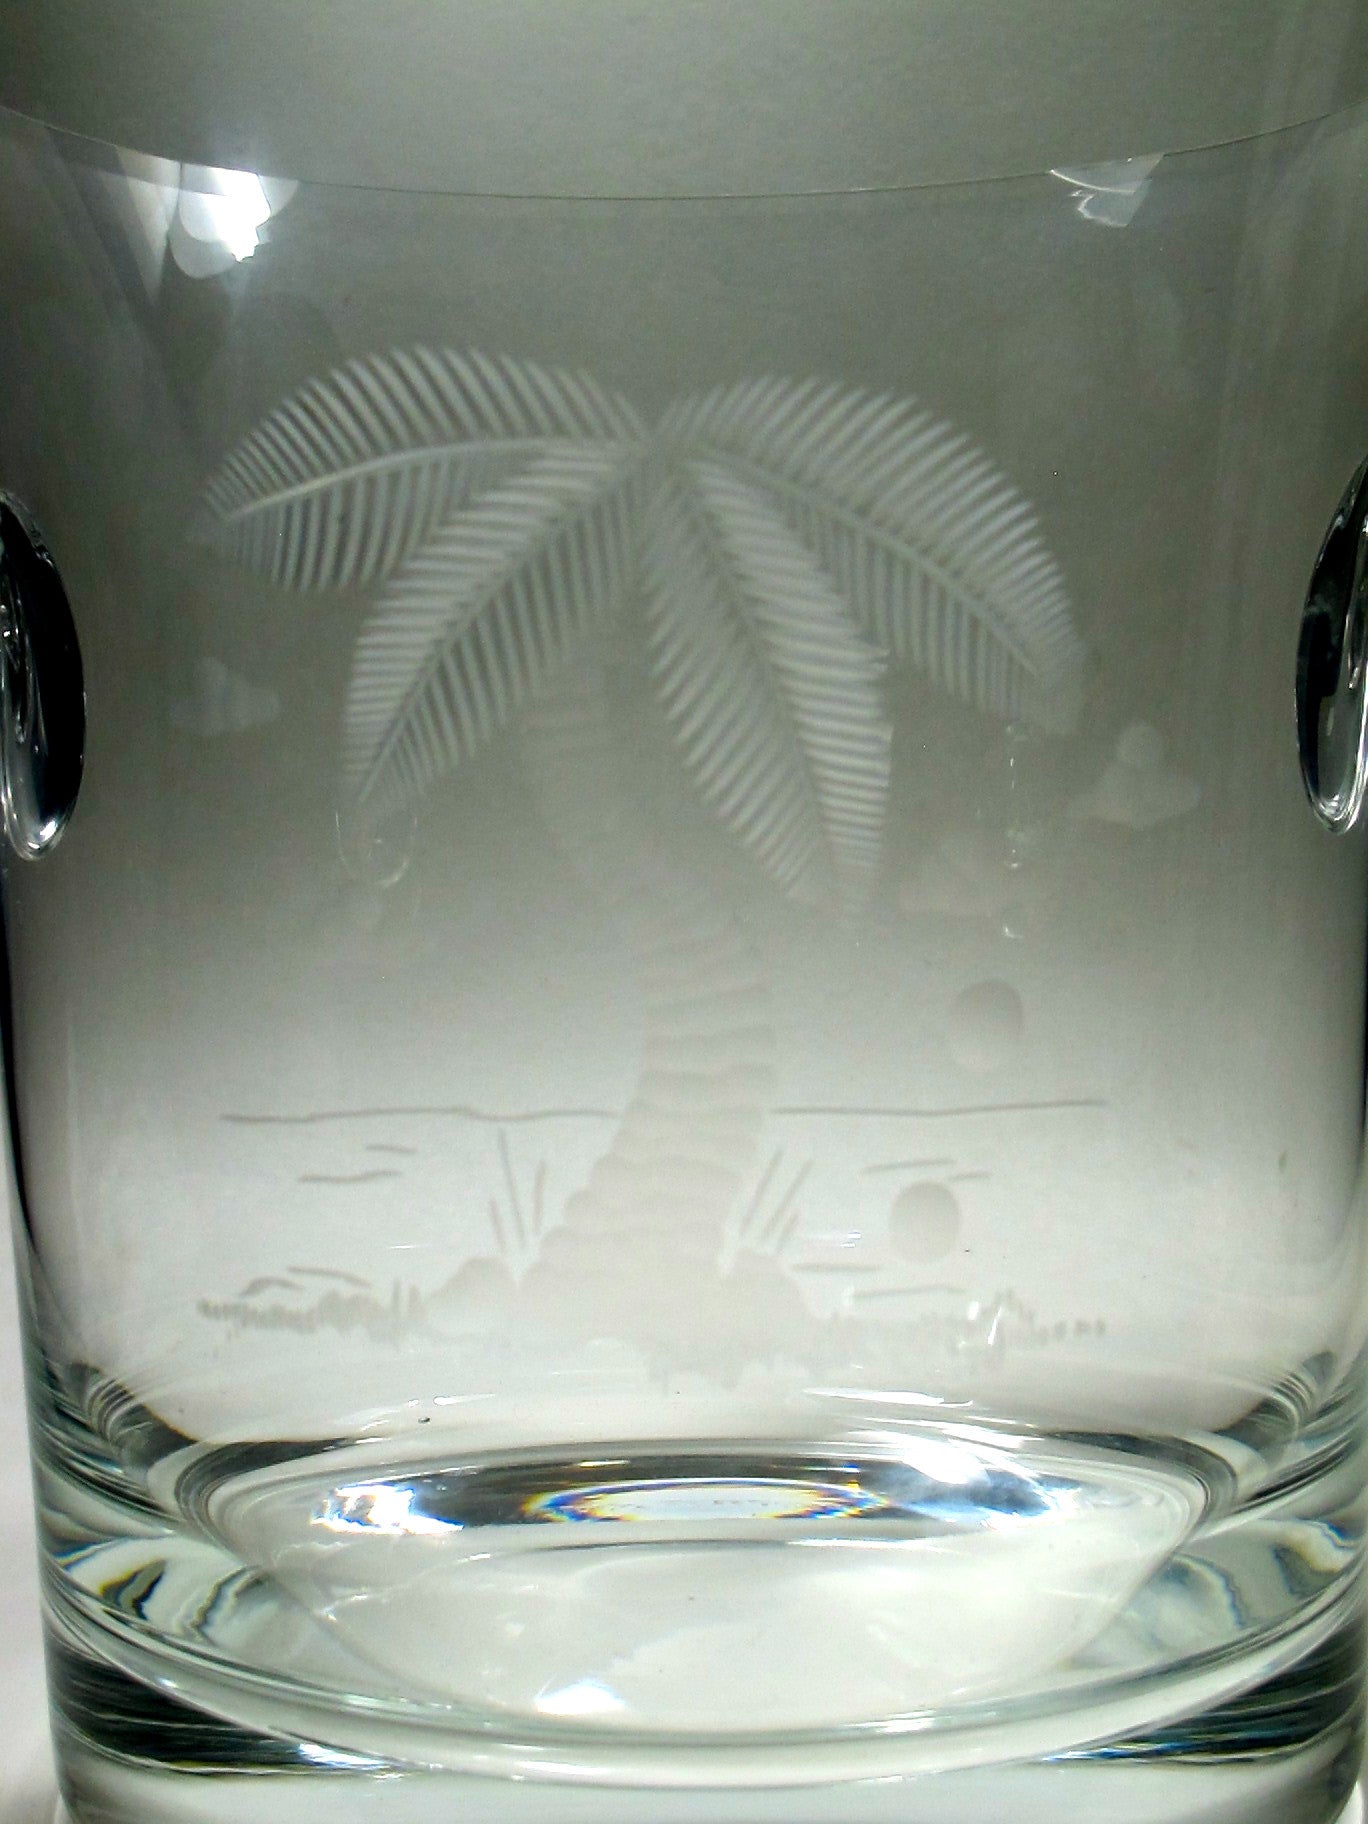 Hand Cut Palm tree champagne bucket glass crystal signed ORourke - O'Rourke crystal awards & gifts abp cut glass